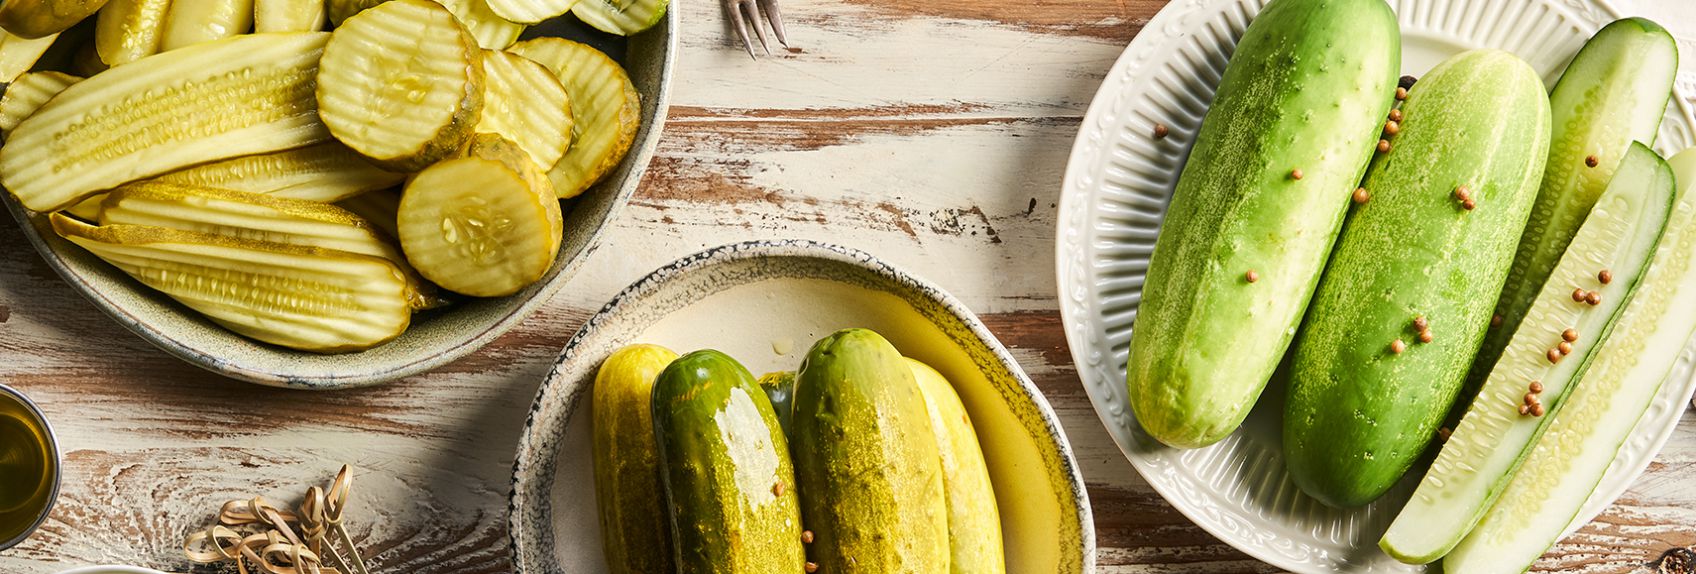 How Patriot Pickle is Making Lunch More Sustainable